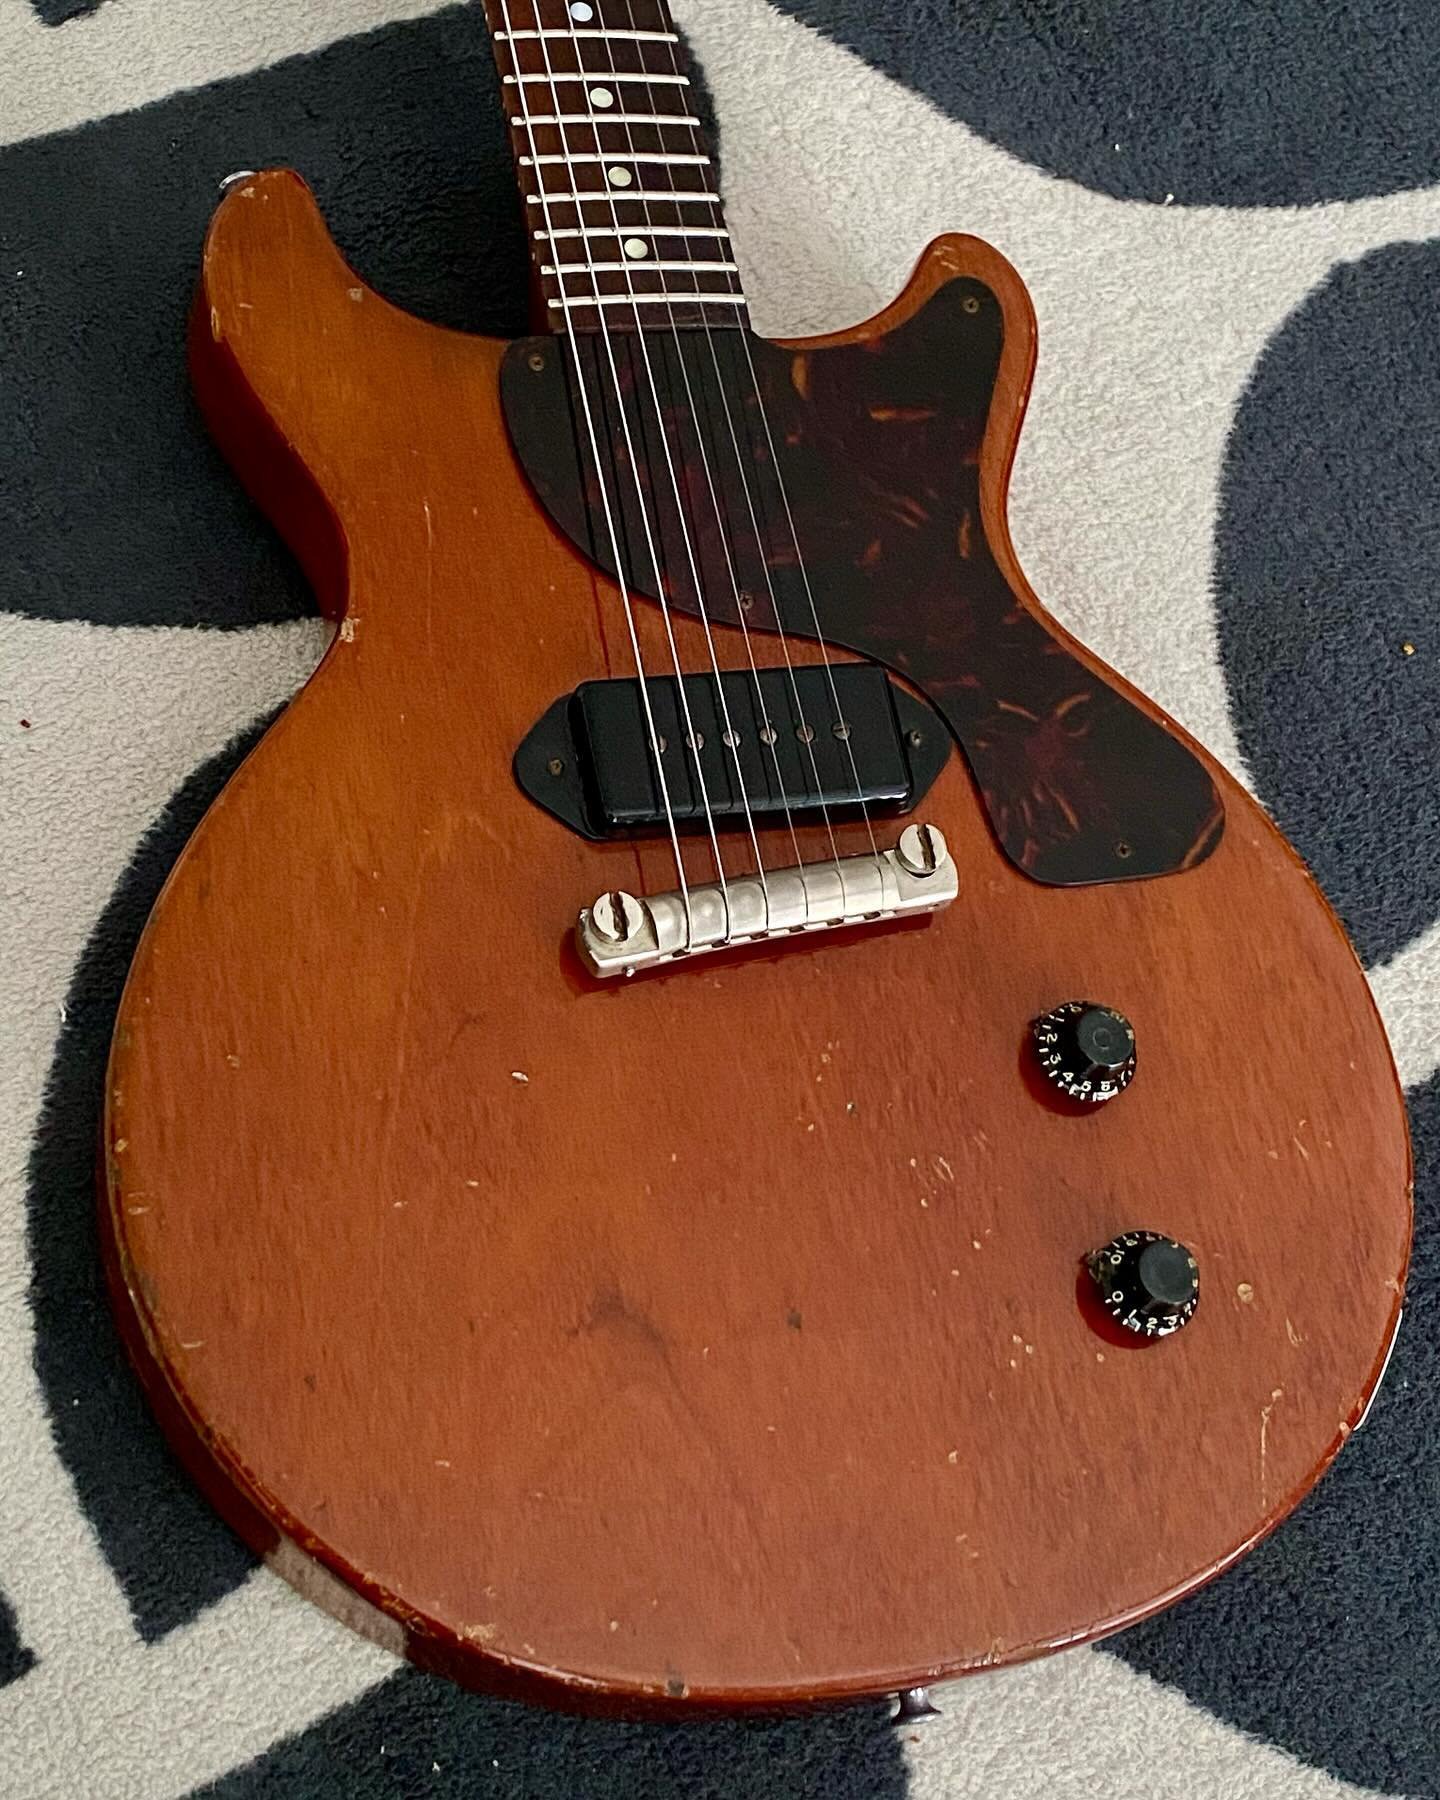 Just landed. A well loved 59 Les Paul Junior. No issues or breaks. Repro tuners and wraparound but originals in the case. More details and pics to follow soon.
.
www.20thcenturytoys.co
.
#gibsonlespauljunior #vintagegibson #lespauljunior 
#geartalk #